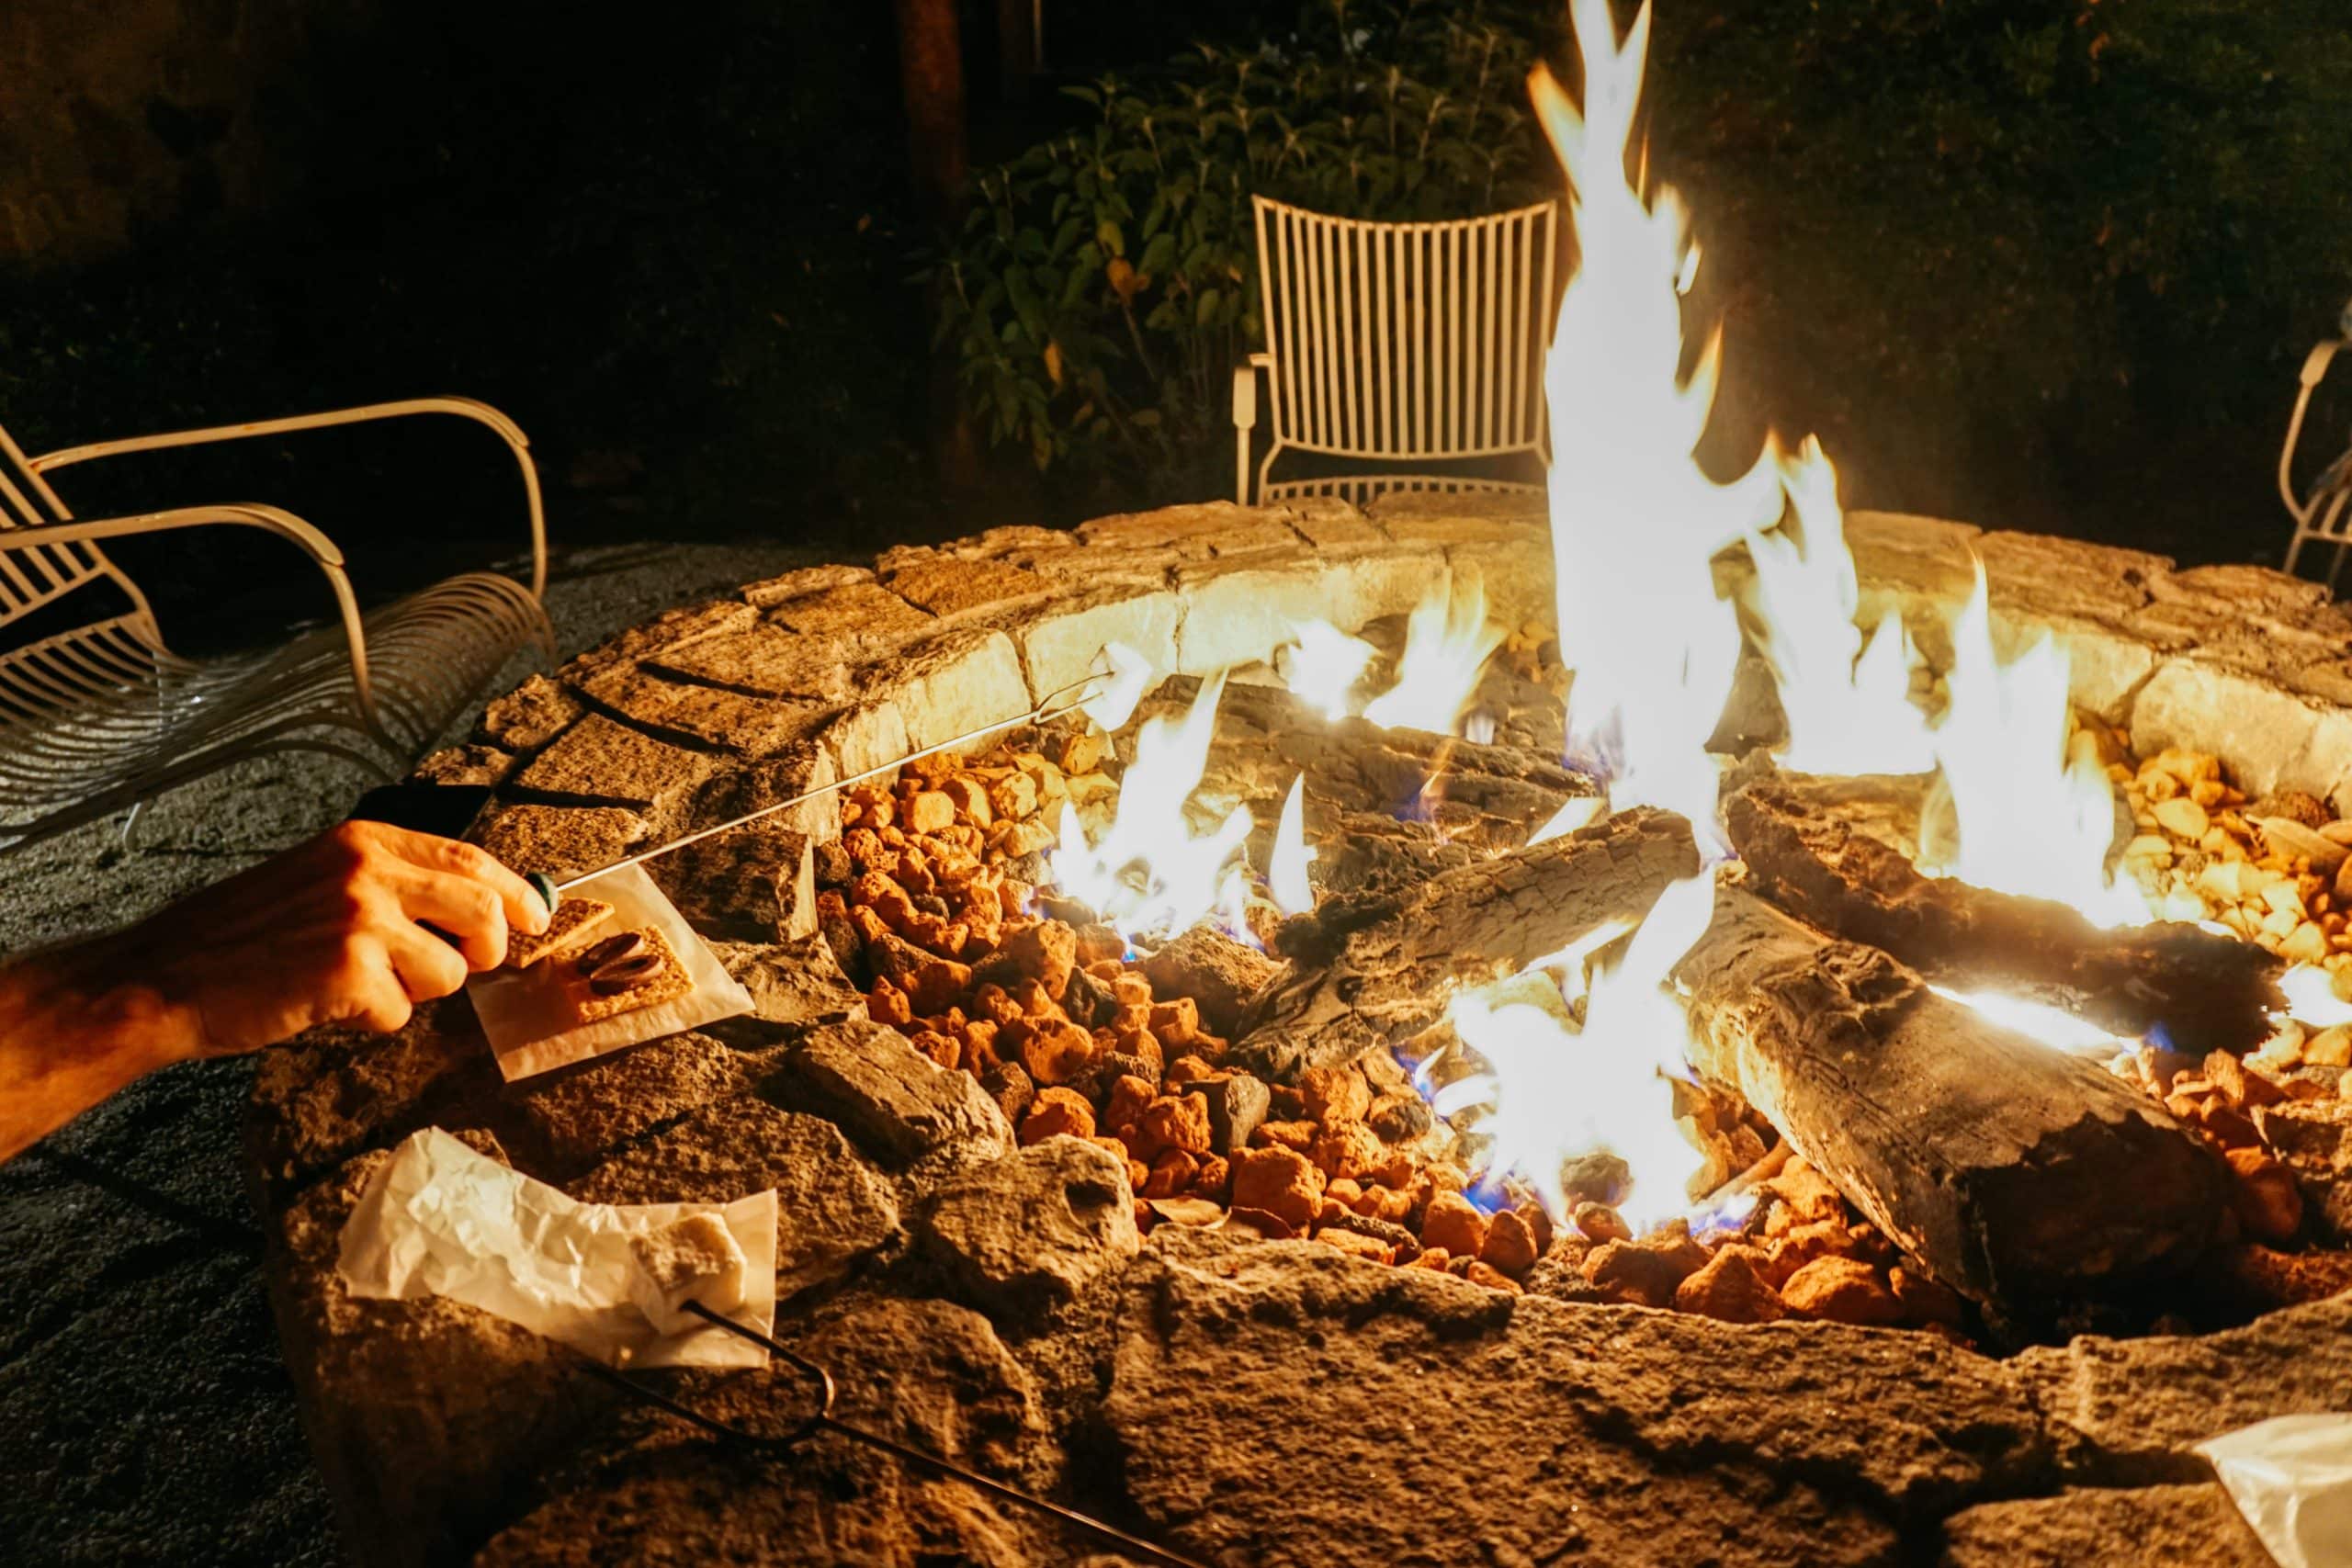 S'mores by the Fire is one of the many charming details of the Farmhouse Inn, a boutique hotel in Sonoma